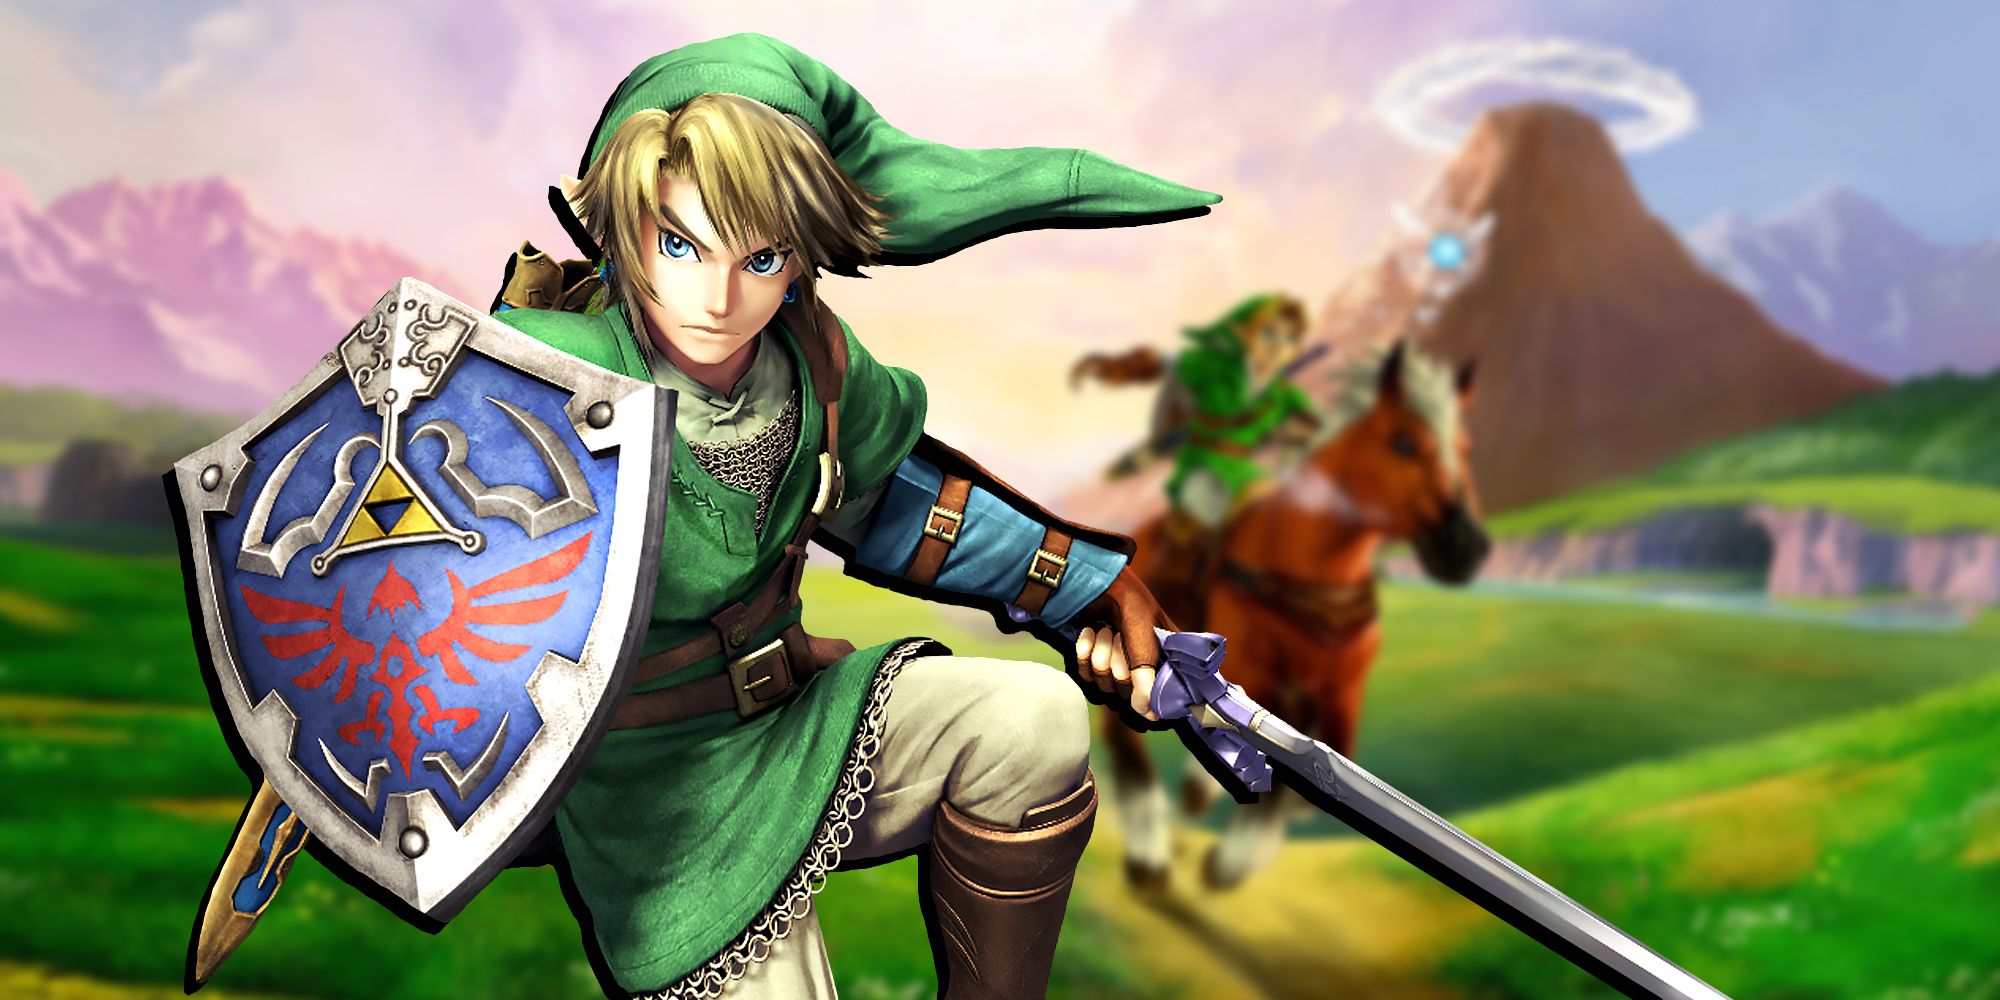 Ocarina of Time Link in front of Ocarina of Time background